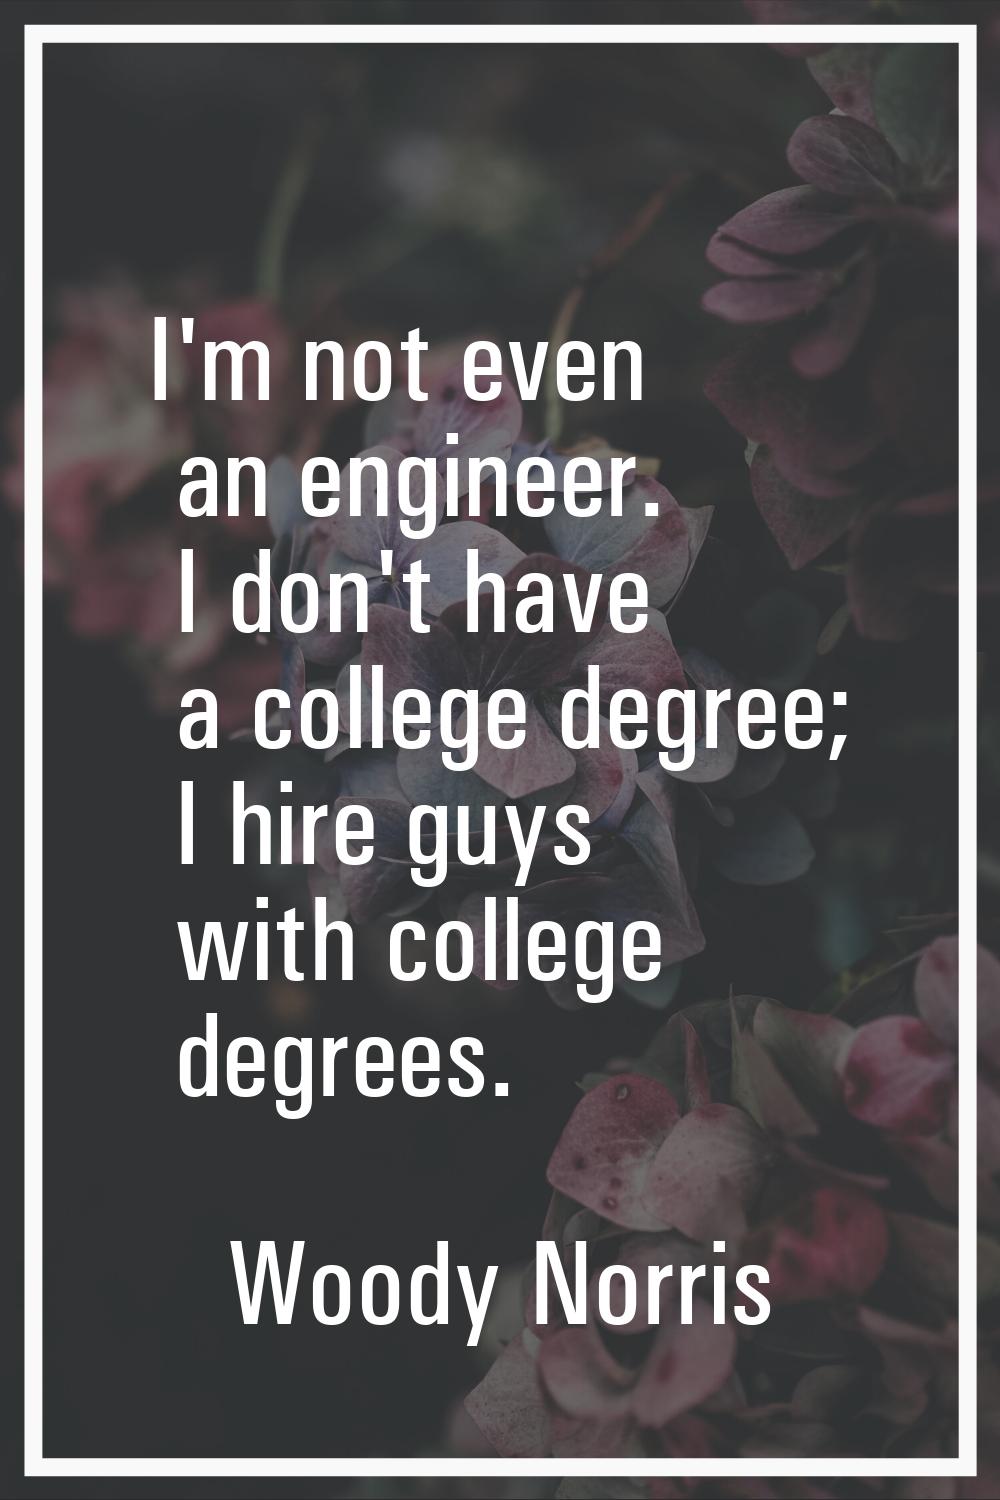 I'm not even an engineer. I don't have a college degree; I hire guys with college degrees.